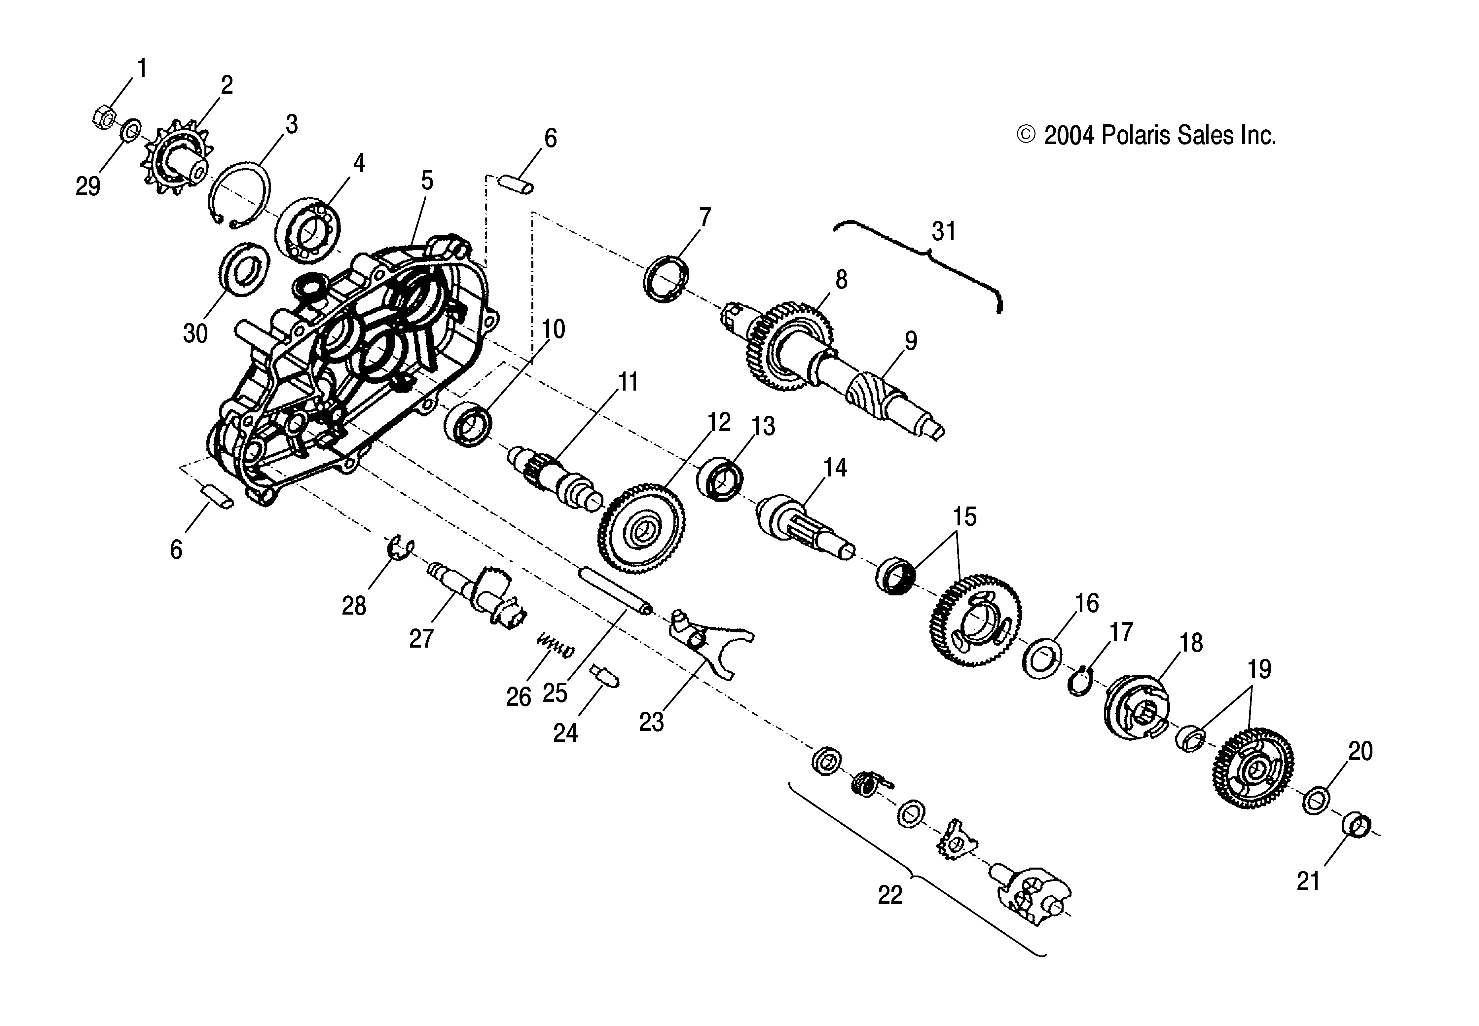 Part Number : 0450264 WASHER(10)